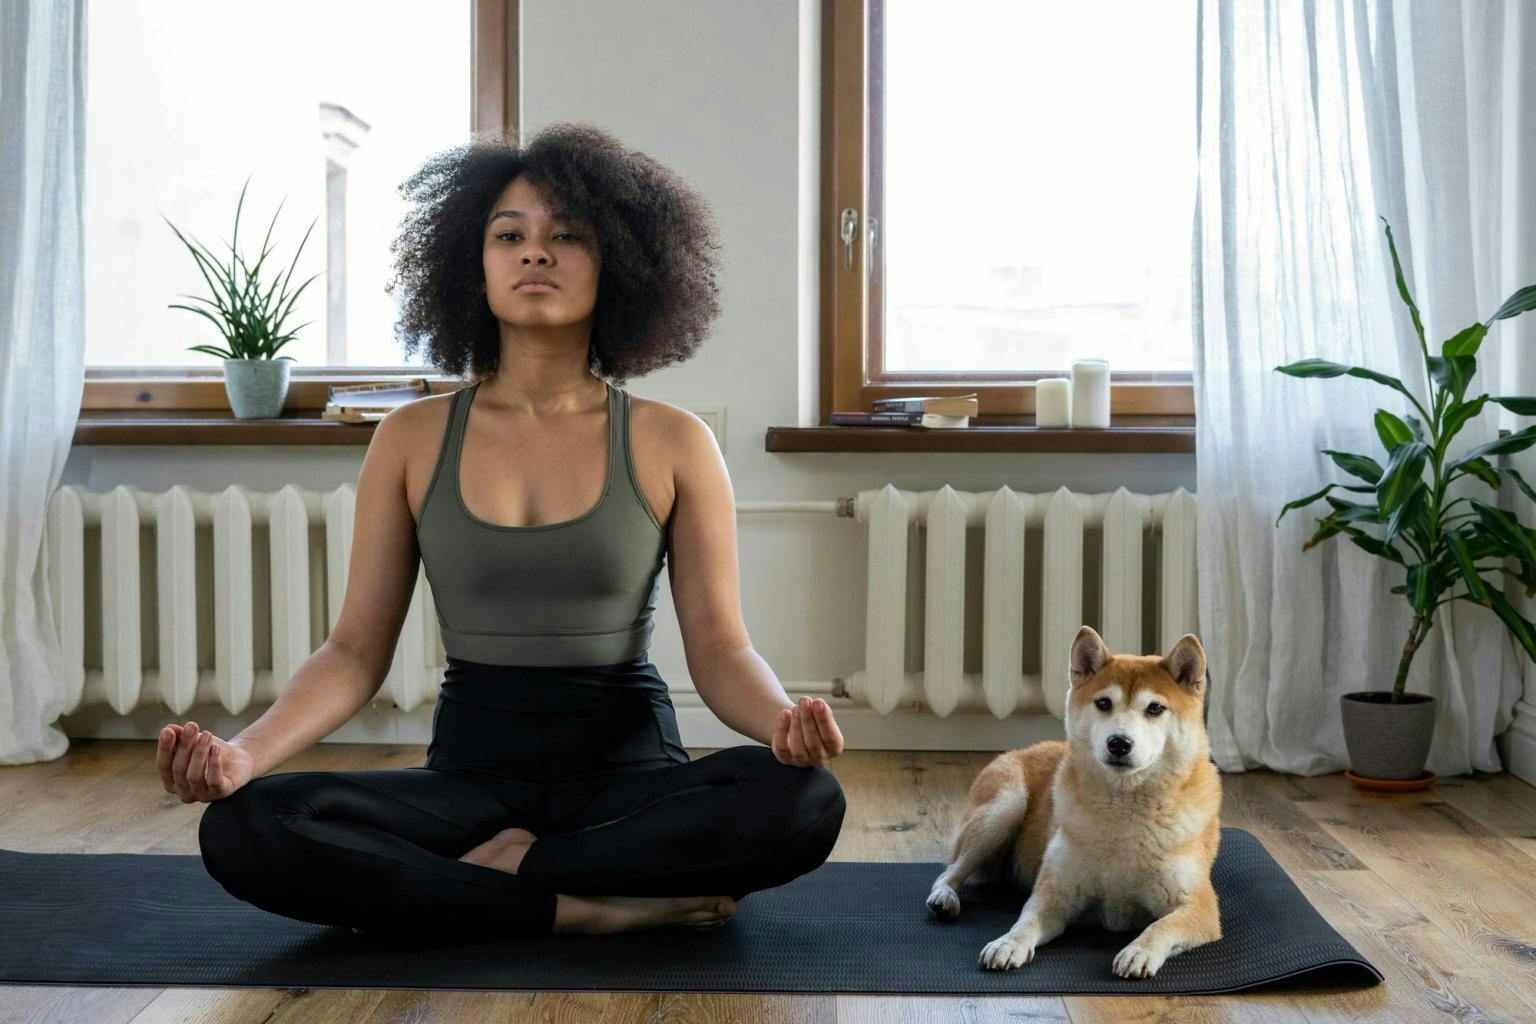 A woman sits on  a yoga mat crossed legged with her dog by her side